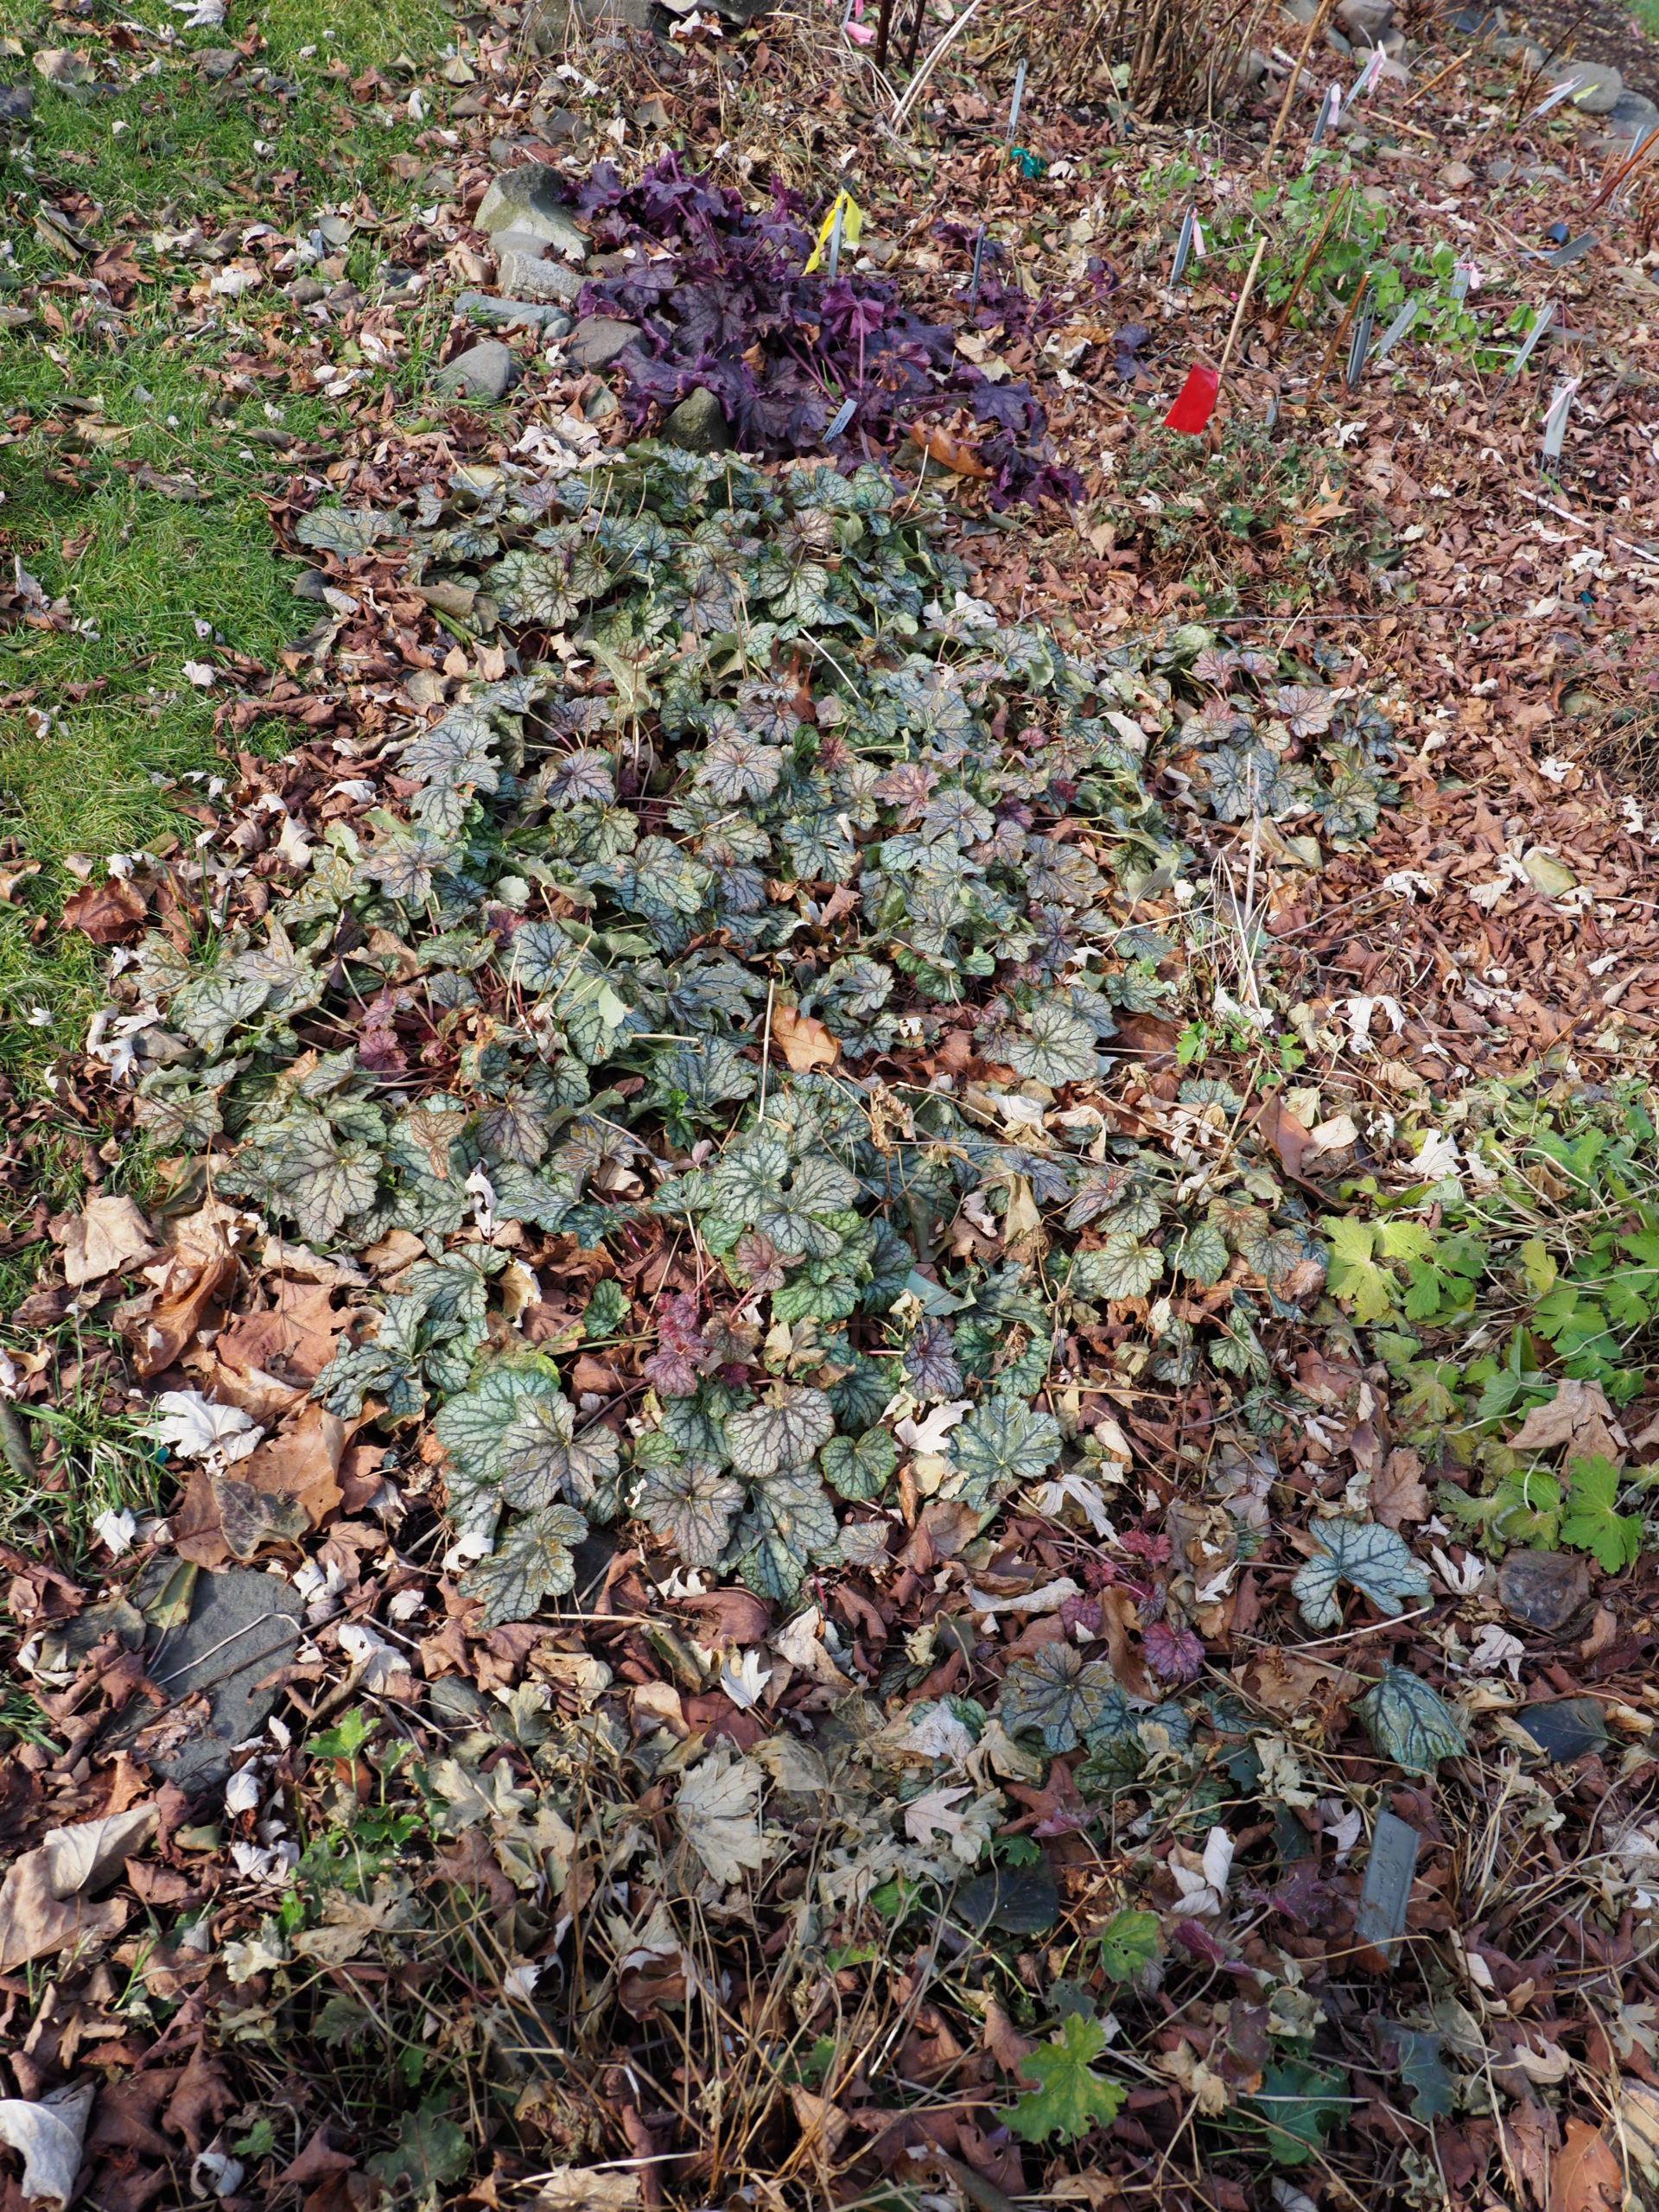 In December these Heuchera are still showing a bit of color and vitality. If mulched now they will rot at the crowns. Let nature take its course and harden the plants off, then when the ground is frozen, they can be lightly mulched.